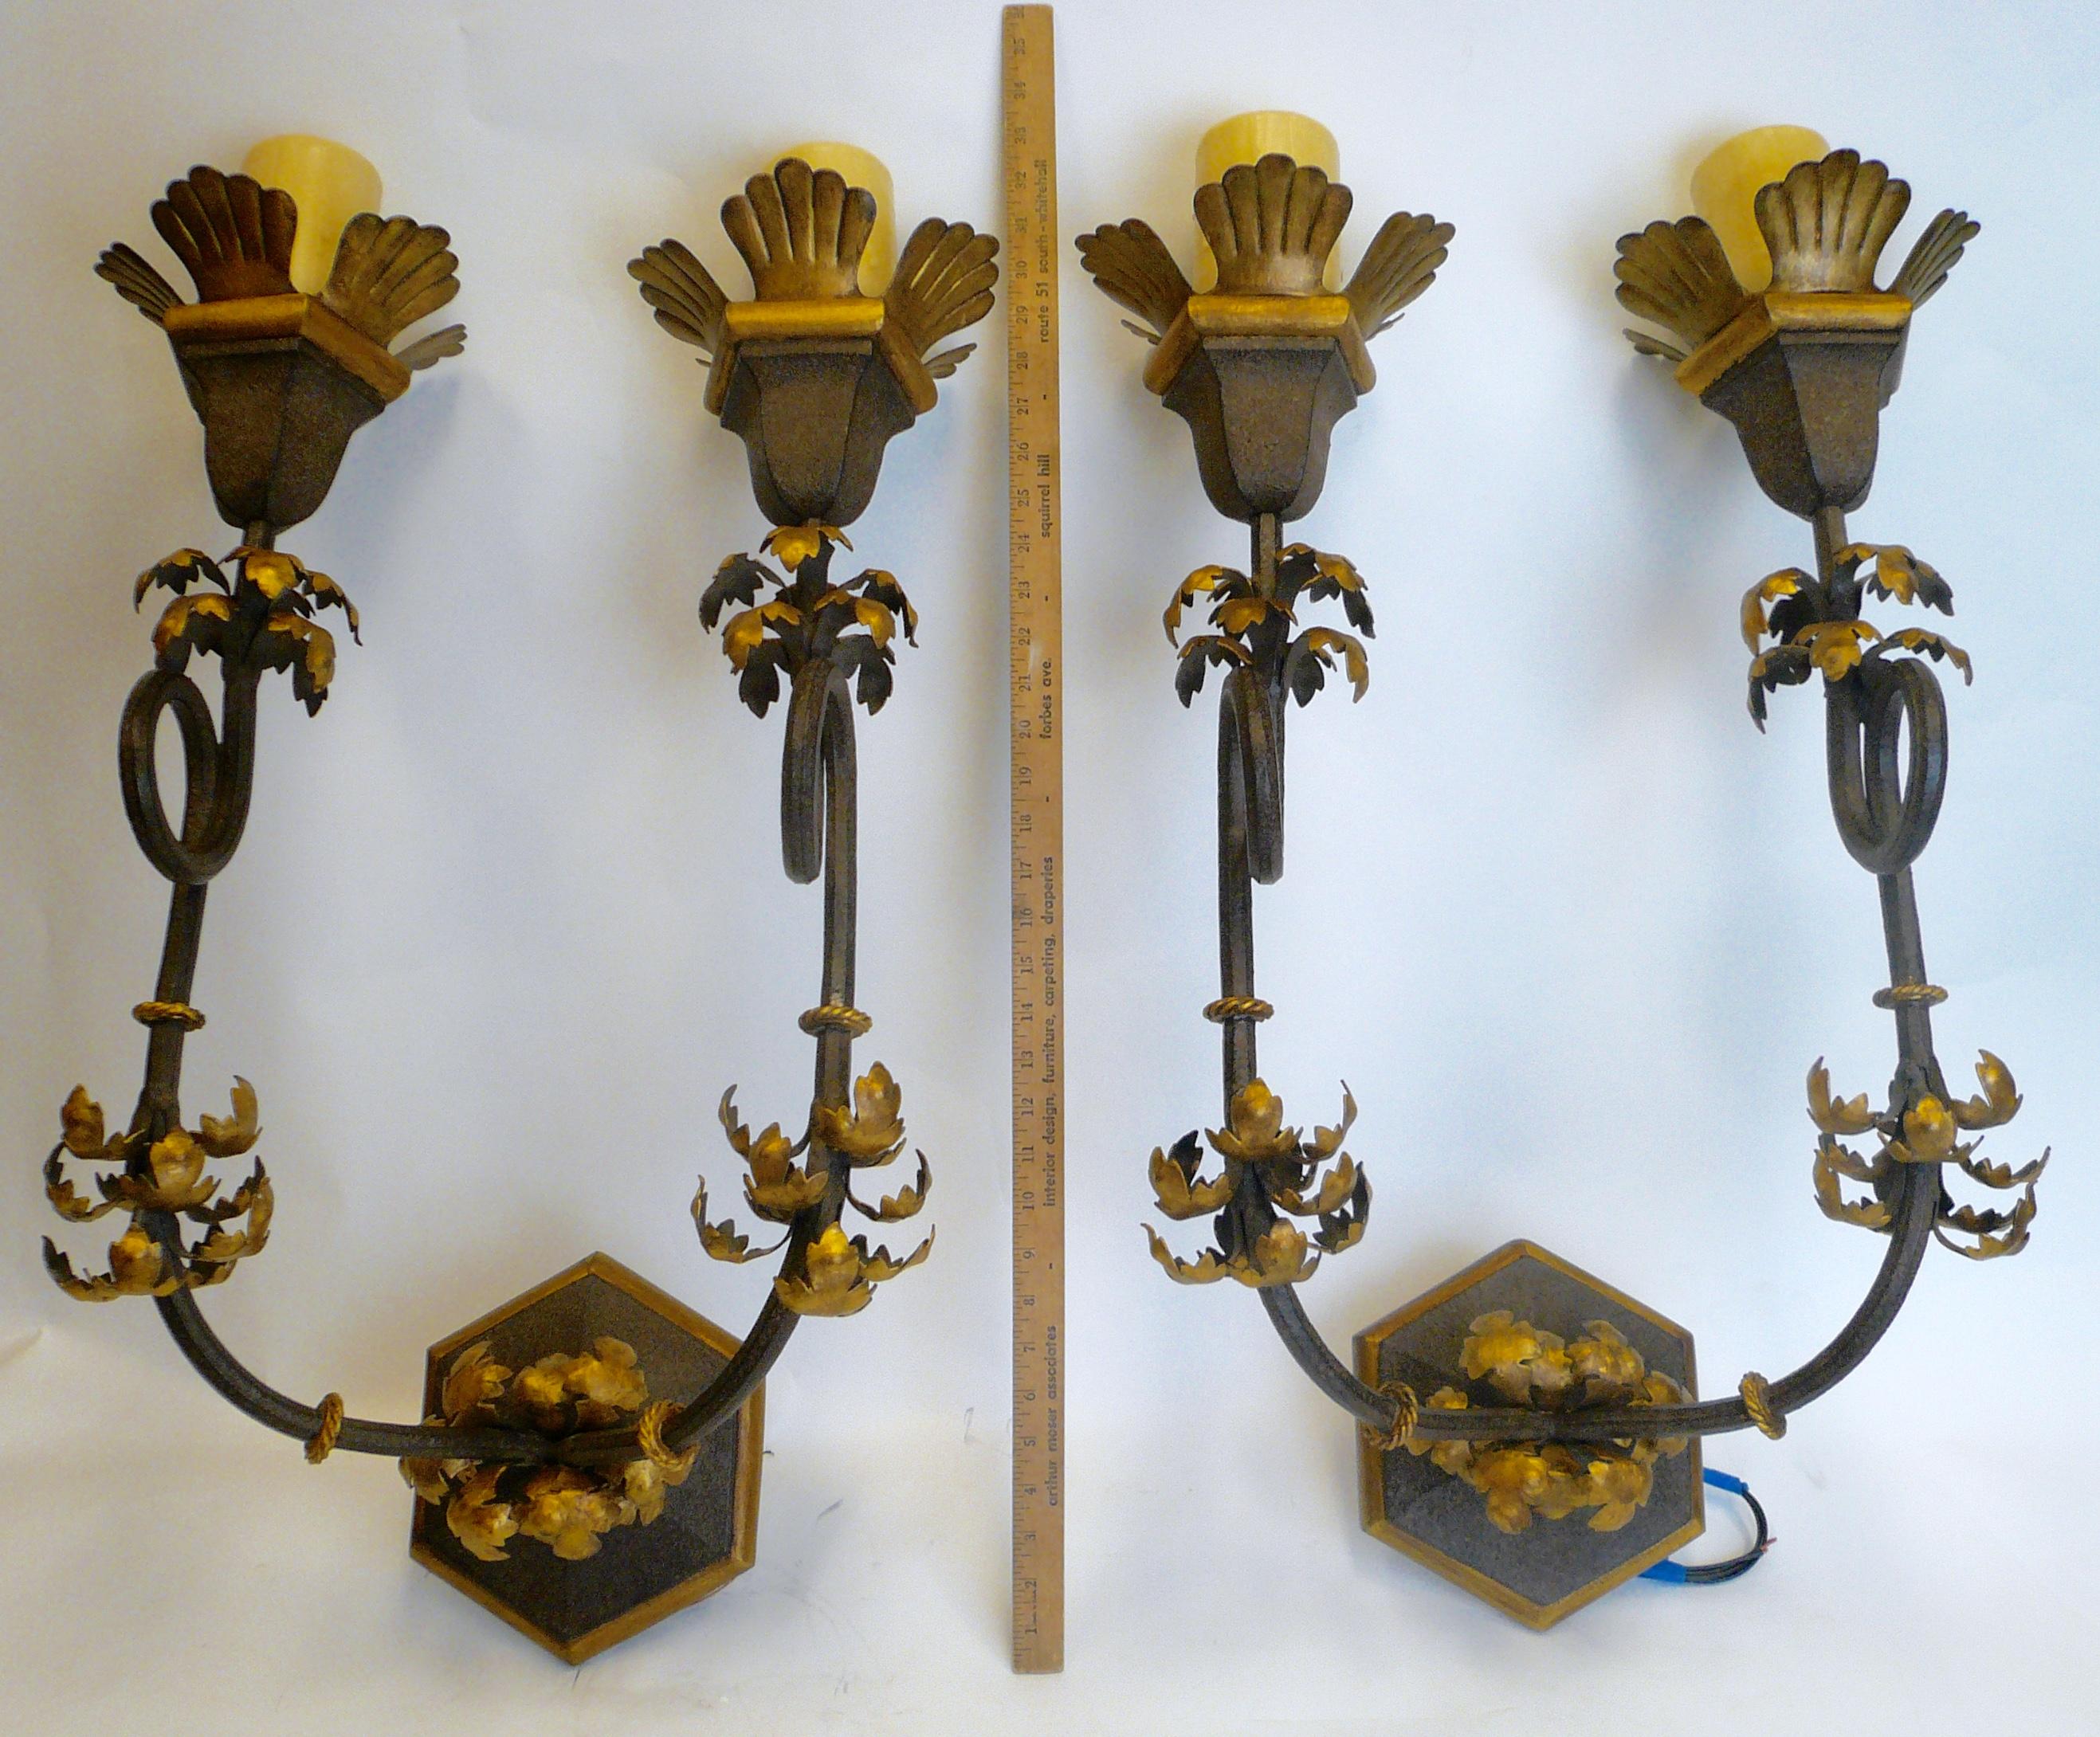 These impressive pair of hand forged wrought iron sconces feature
carved and hand painted hardwood backs, and gilded highlights.
They were purchased new from Gregorius Pineo (the trade price was over $4,000.00 each), and have never been used!